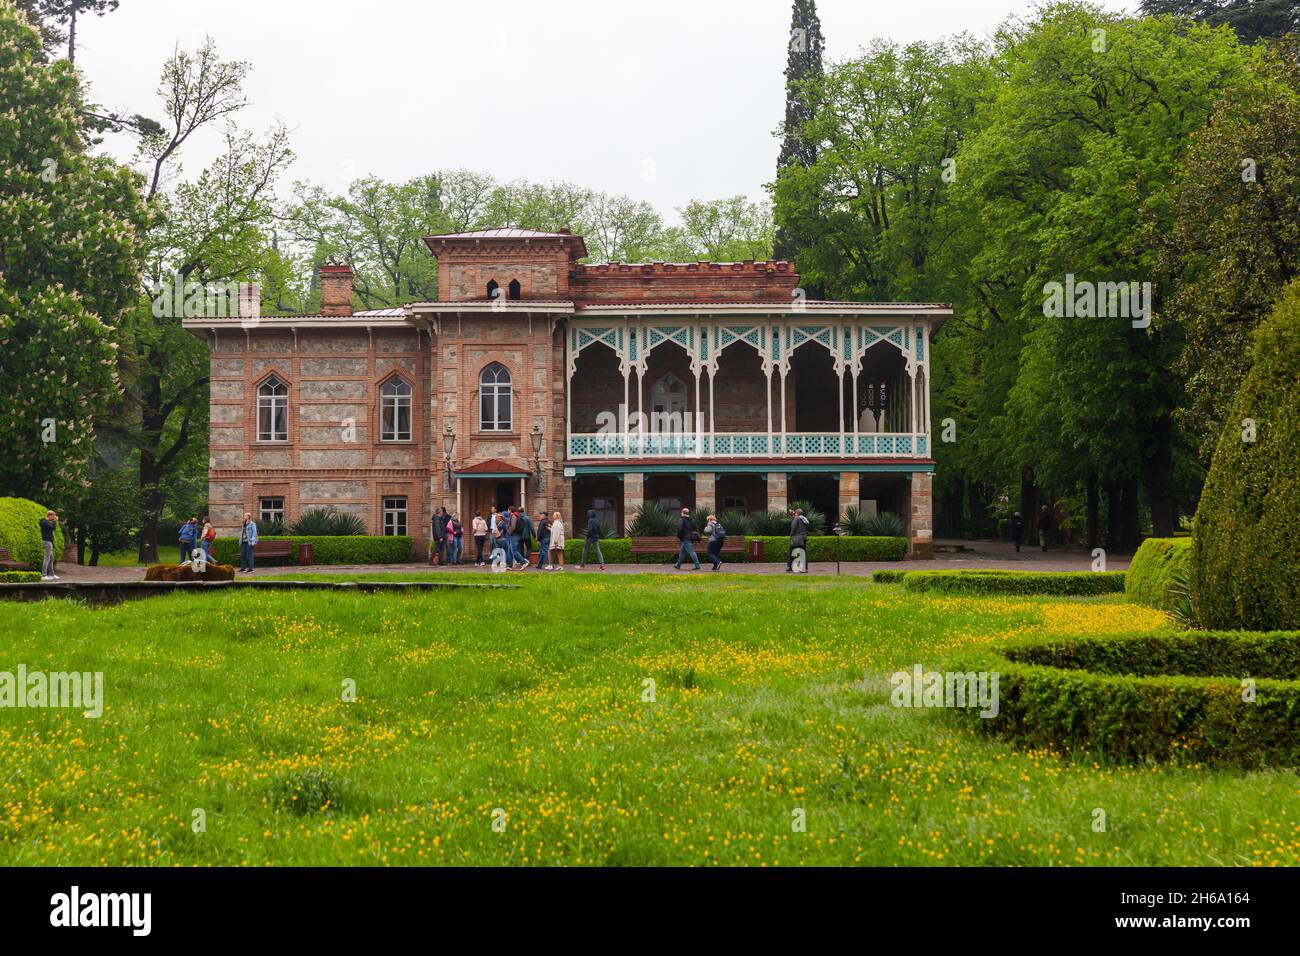 Tsinandali, Georgia - May 4, 2019: Tourists visit the Tsinandali residence located a village in Kakheti, Georgia, situated in the district of Telavi, Stock Photo